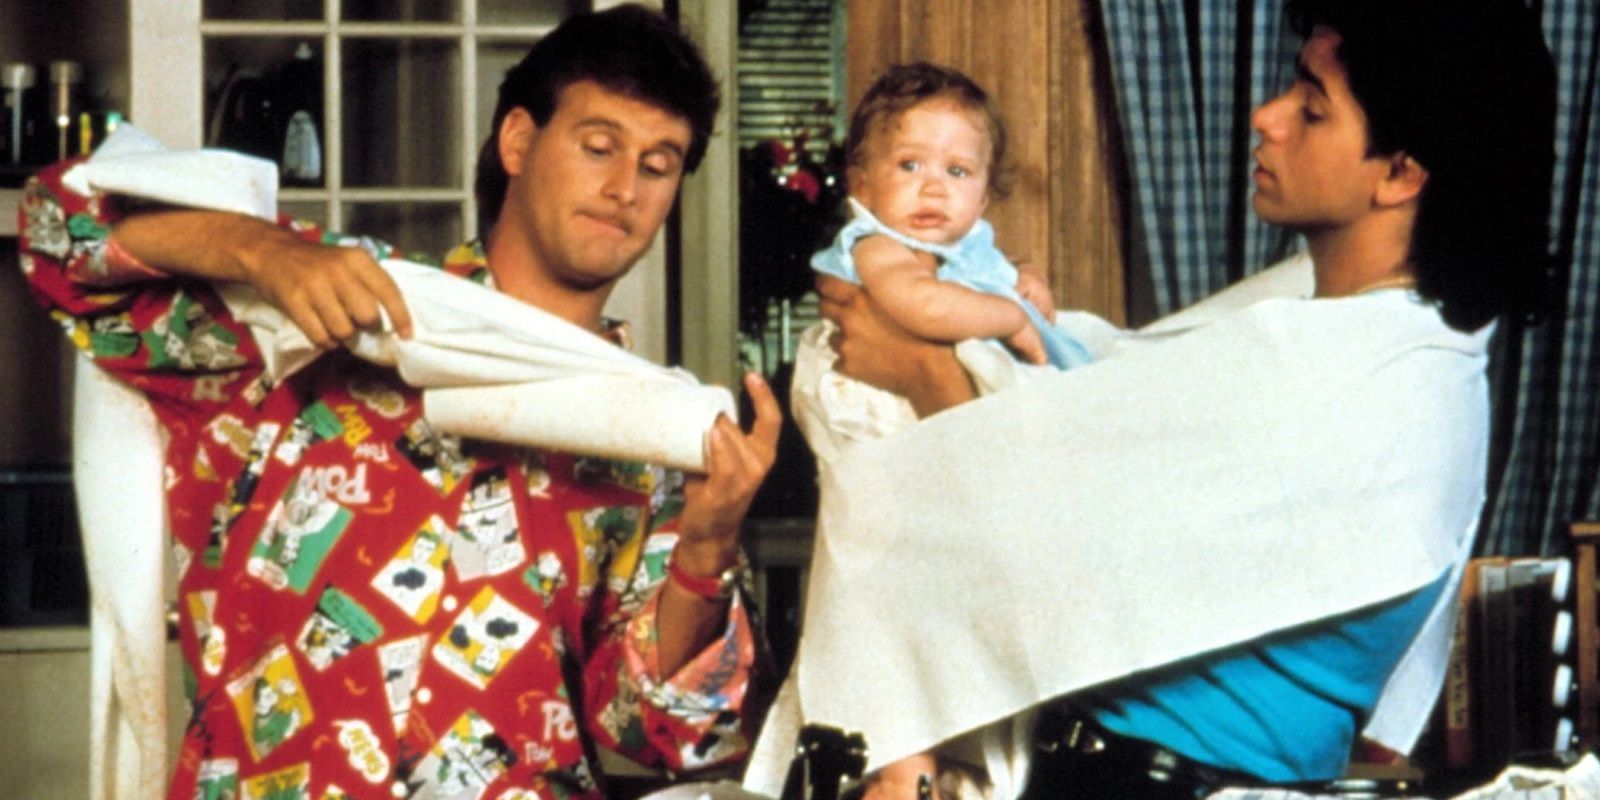 Full House characters Joey and Jesse with a baby Michelle